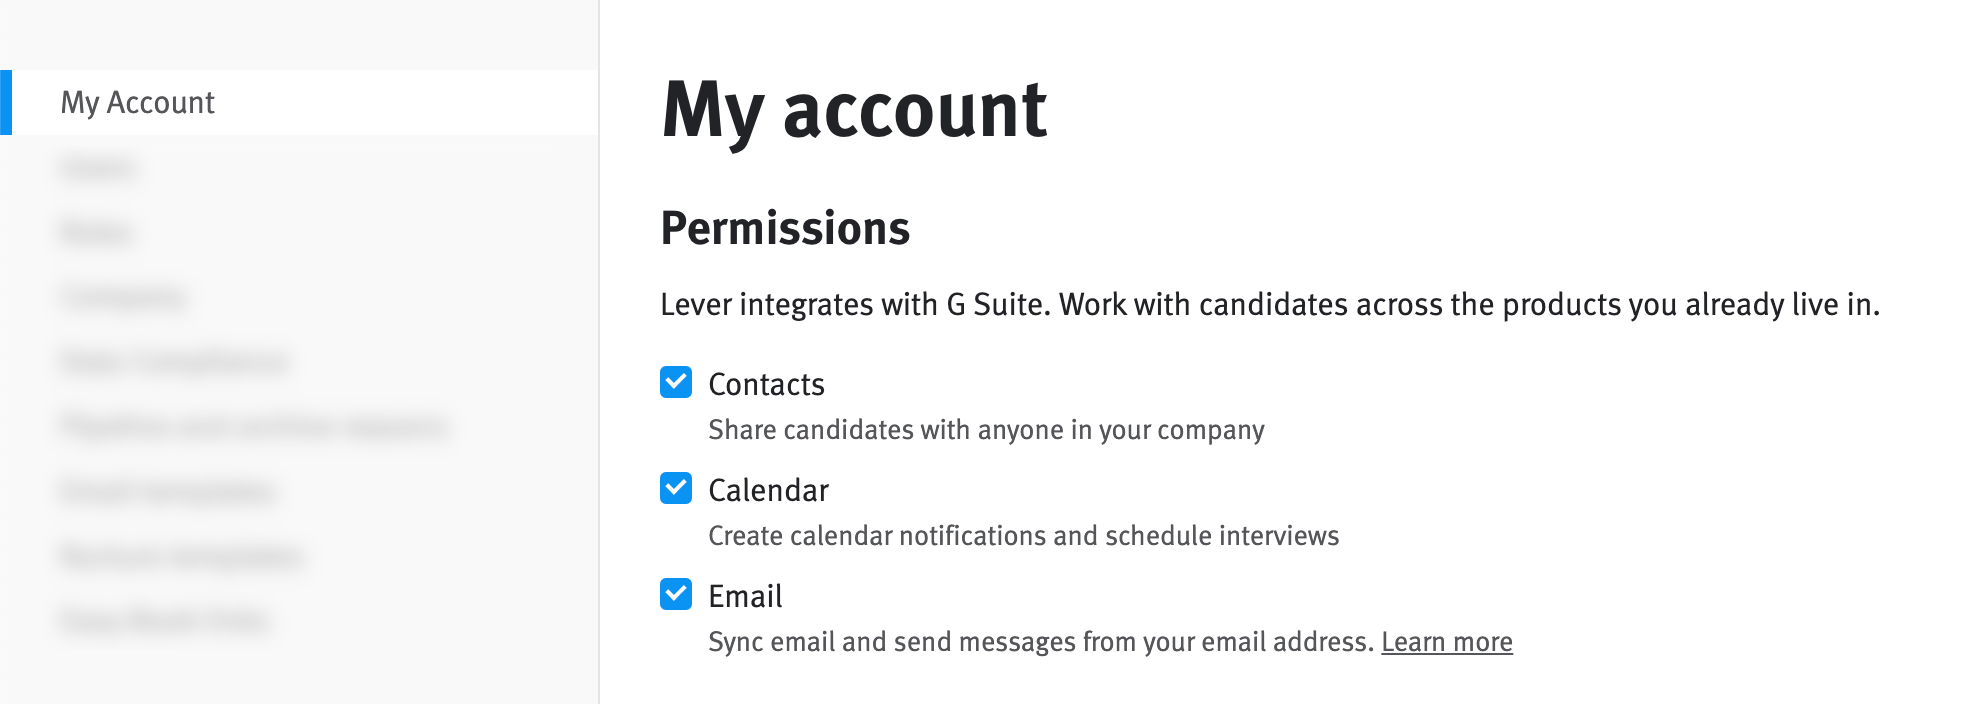 Contact, Calendar, and Email permission checkboxs in personal account settings.